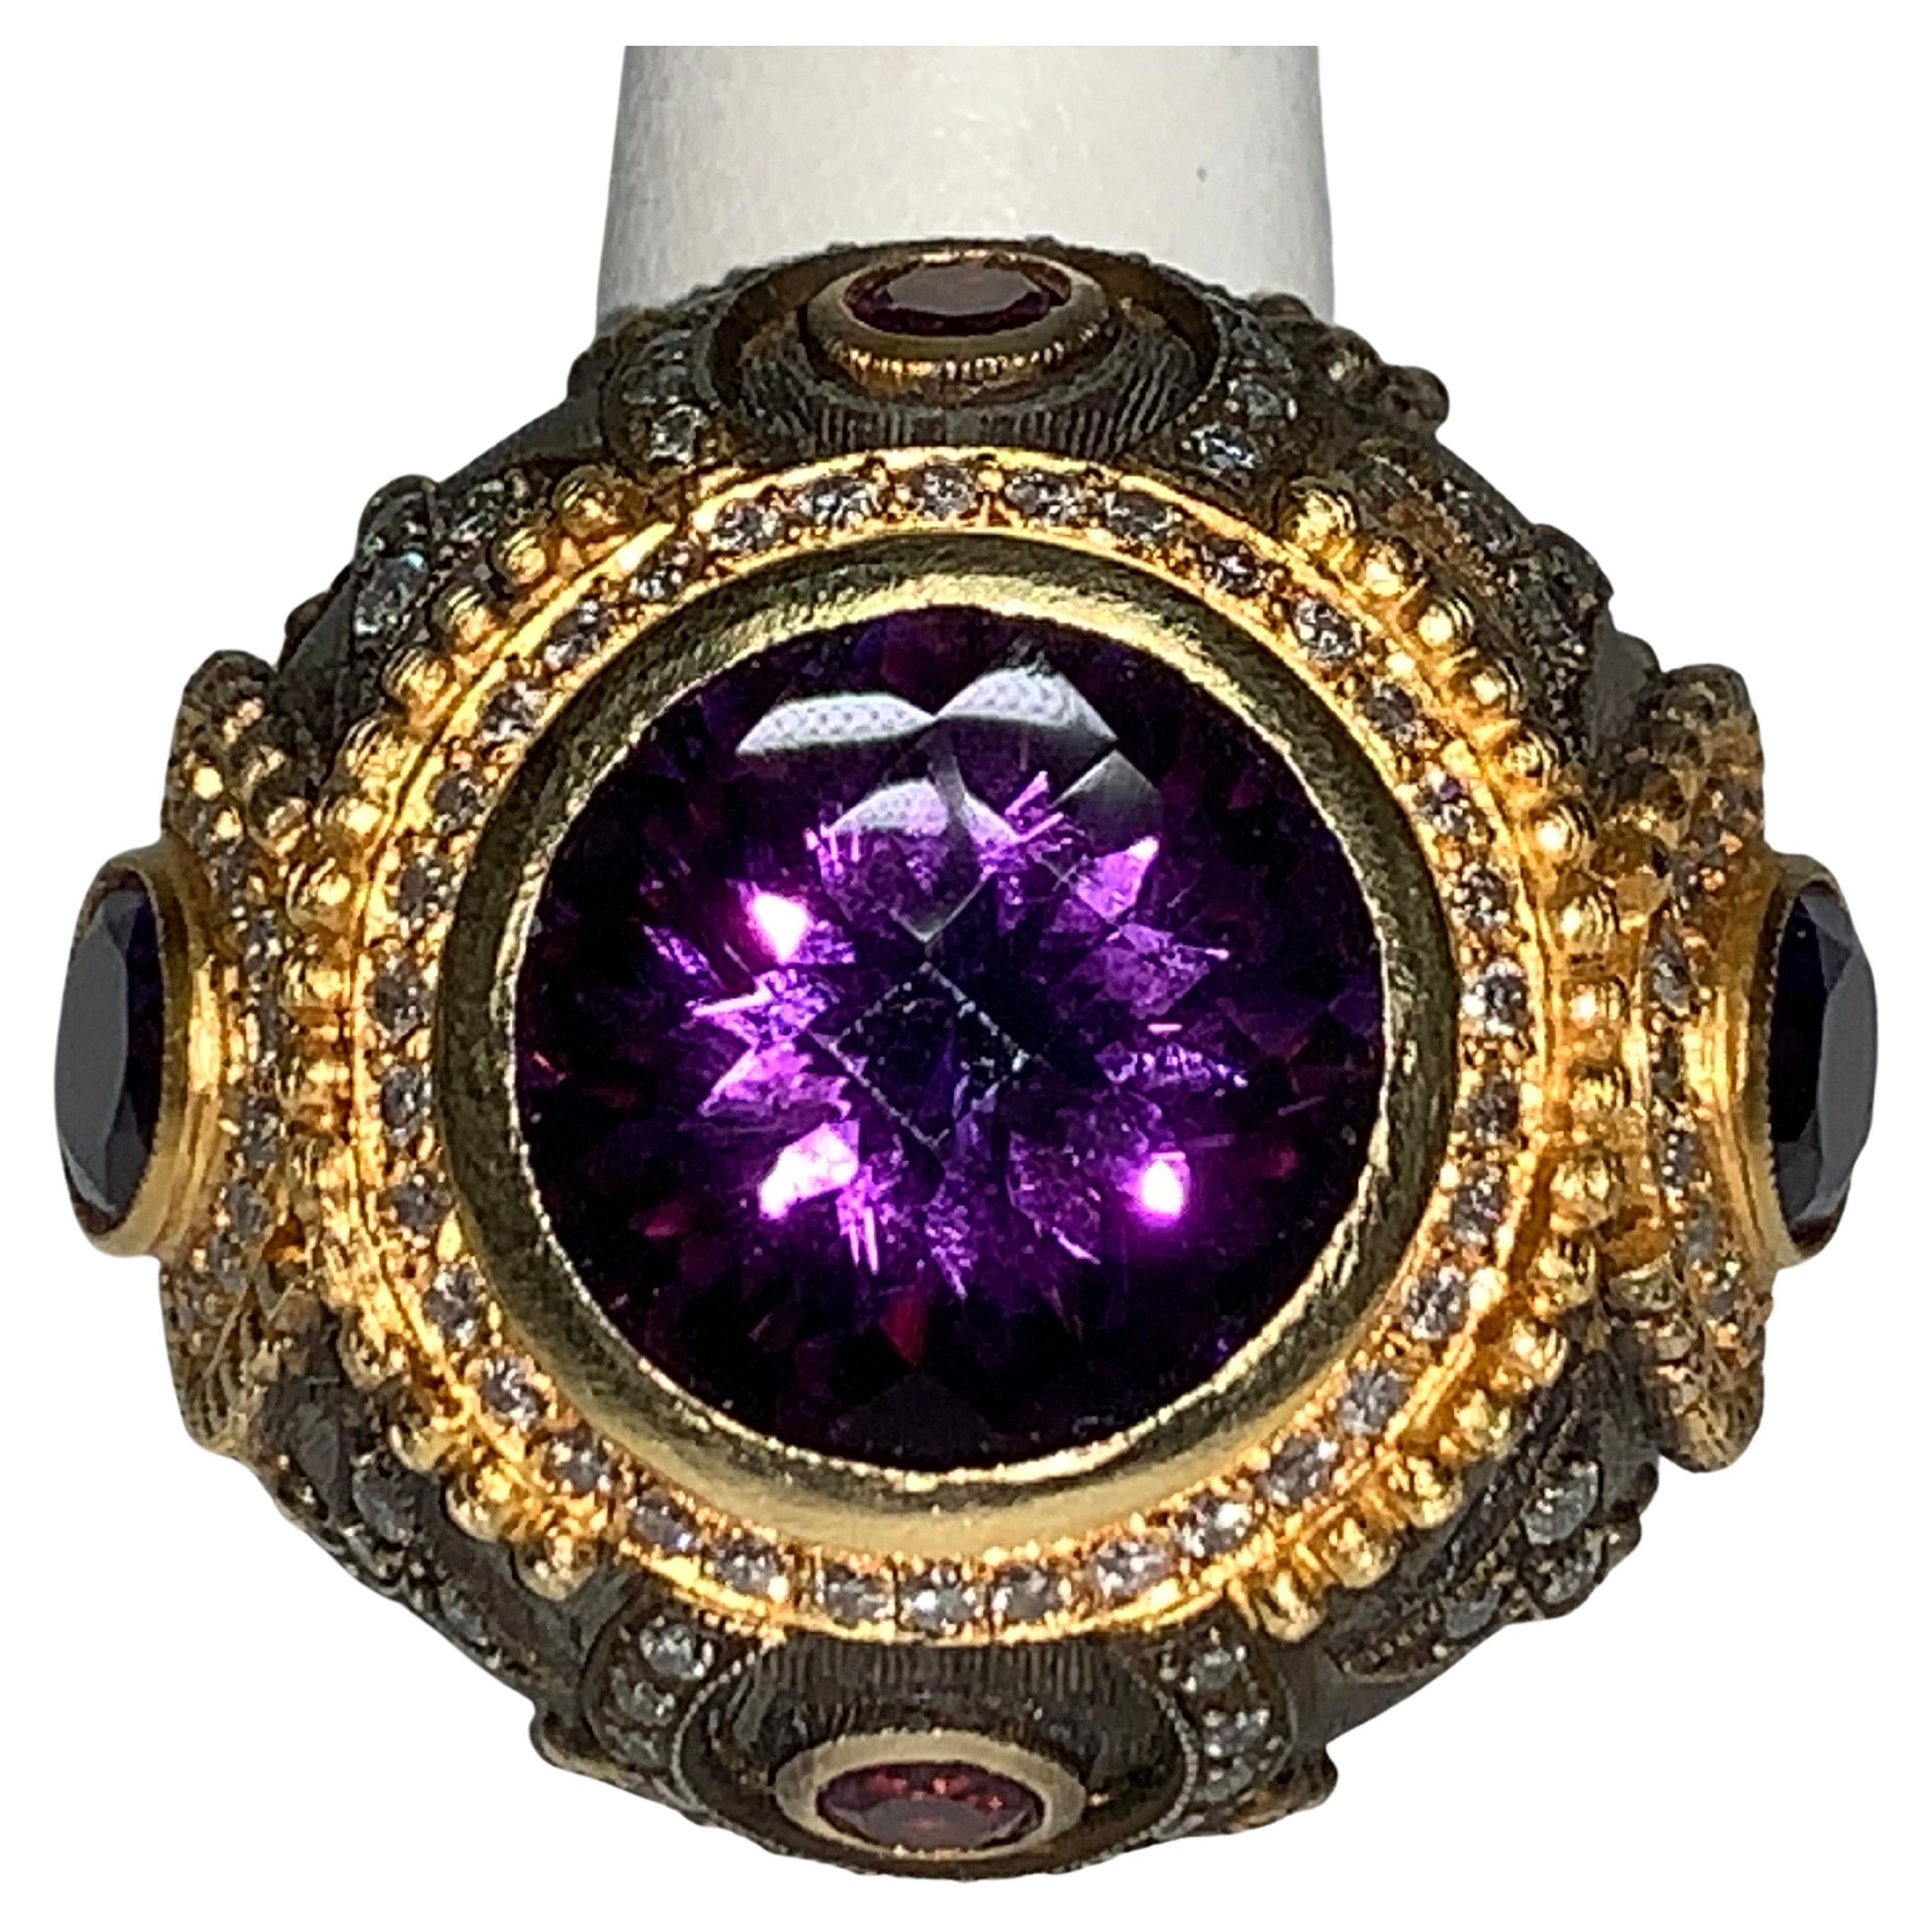 Amethyst, White Diamond Ring, 16.30 Carats

Featuring an exquisite 14.5 Carat Amethyst Stone; accented Round White Diamonds, a total weight of 1.80 Carats, set in 18K Yellow Gold & Oxidized Sterling Silver.  Total weight of 16.30 Carats

Size 7.5,